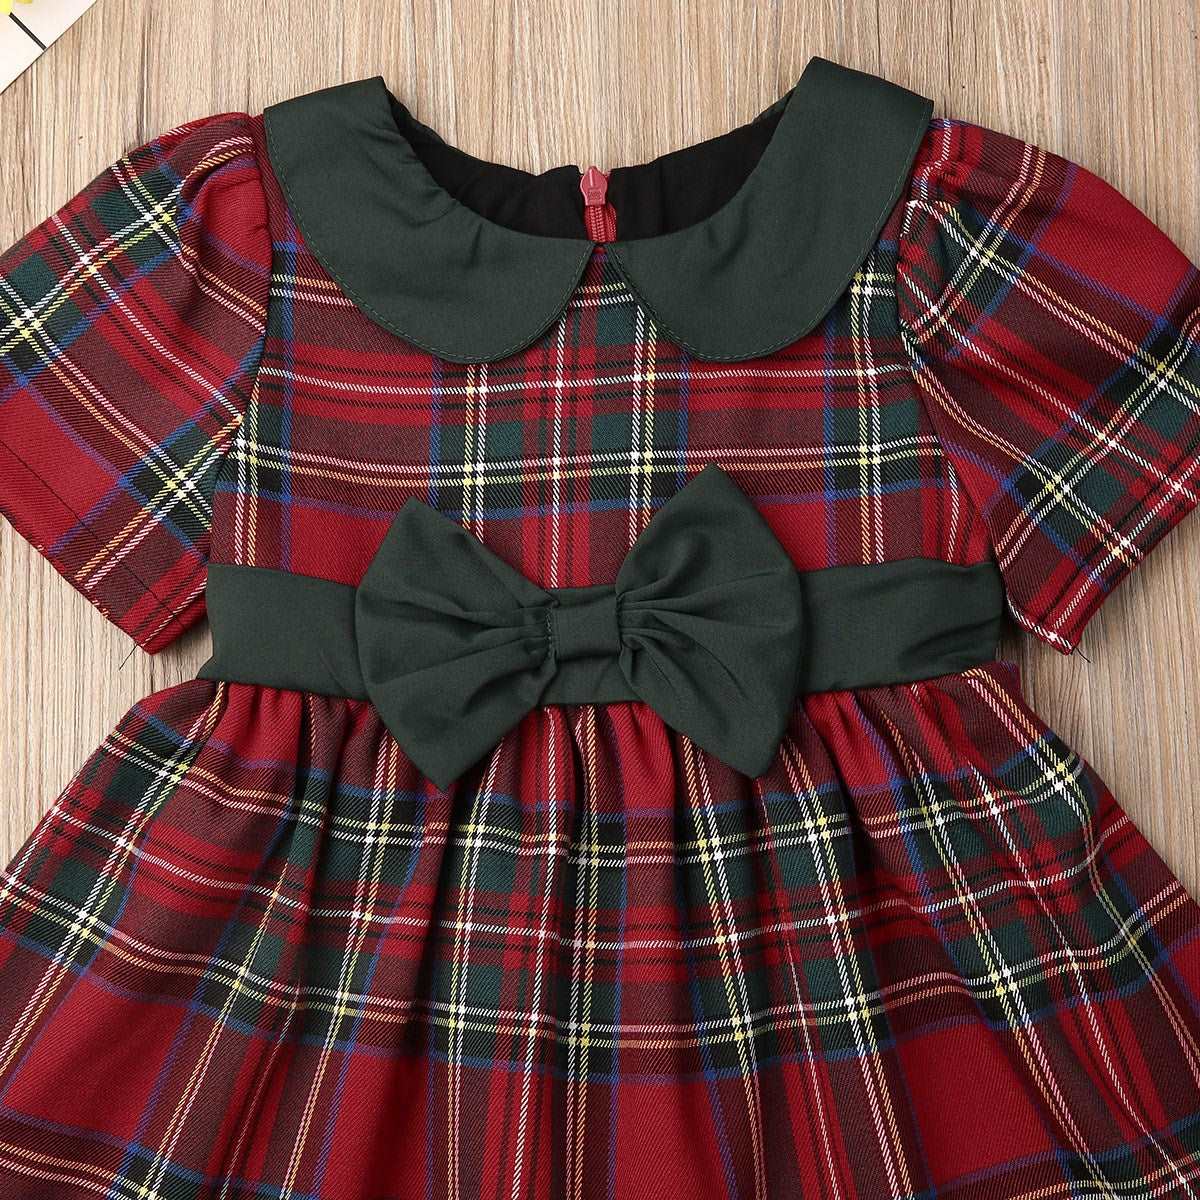 Child Baby Girl 3 Years Old Girl Clothes Dress Kids clothes